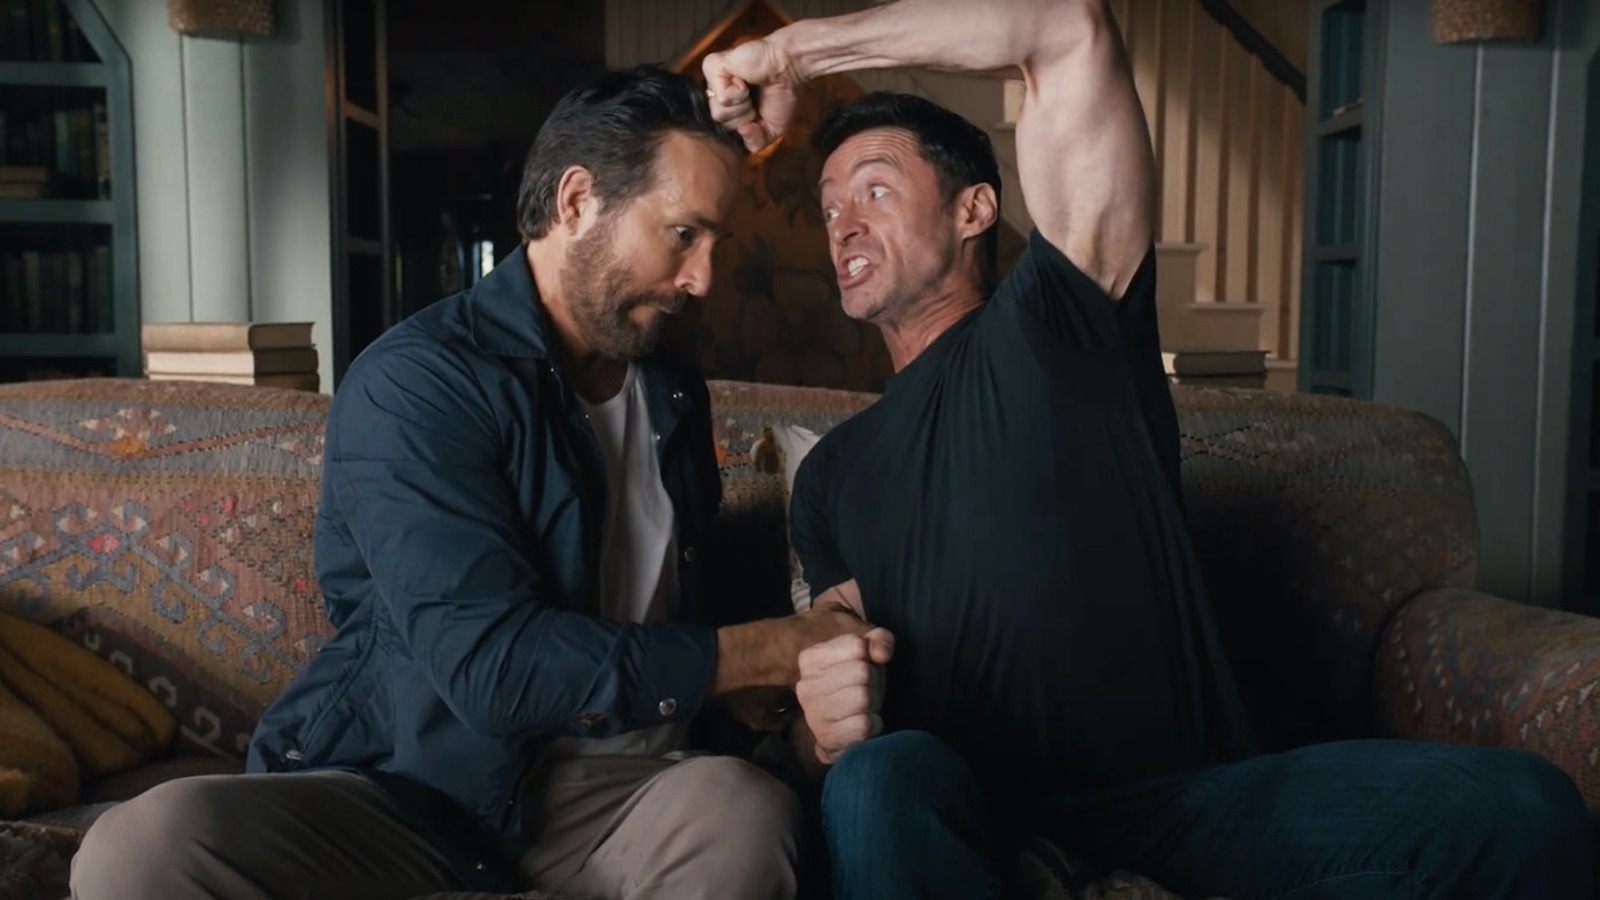 Hugh Jackmans Wolverine Dramatically Increases Deadpool 3s Box Office Prospects 